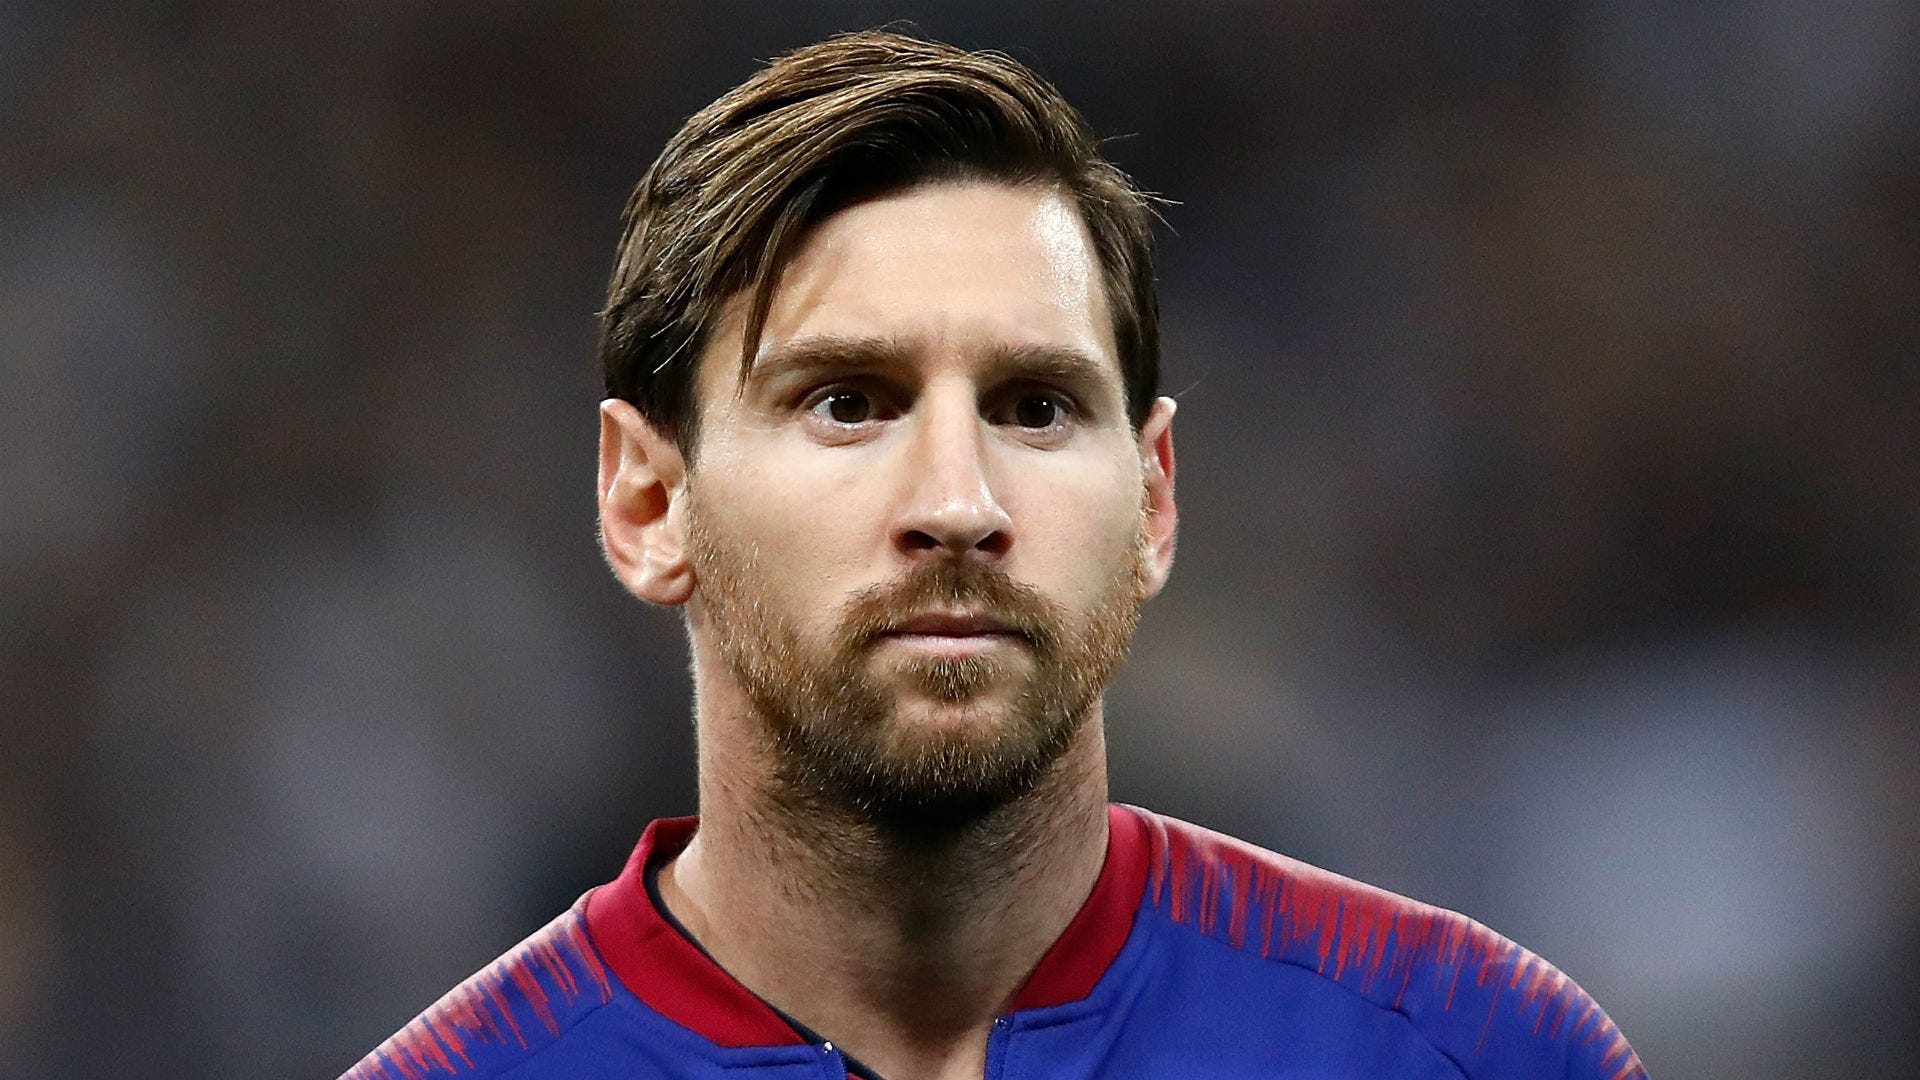 How much was Messi offered to go to Miami?